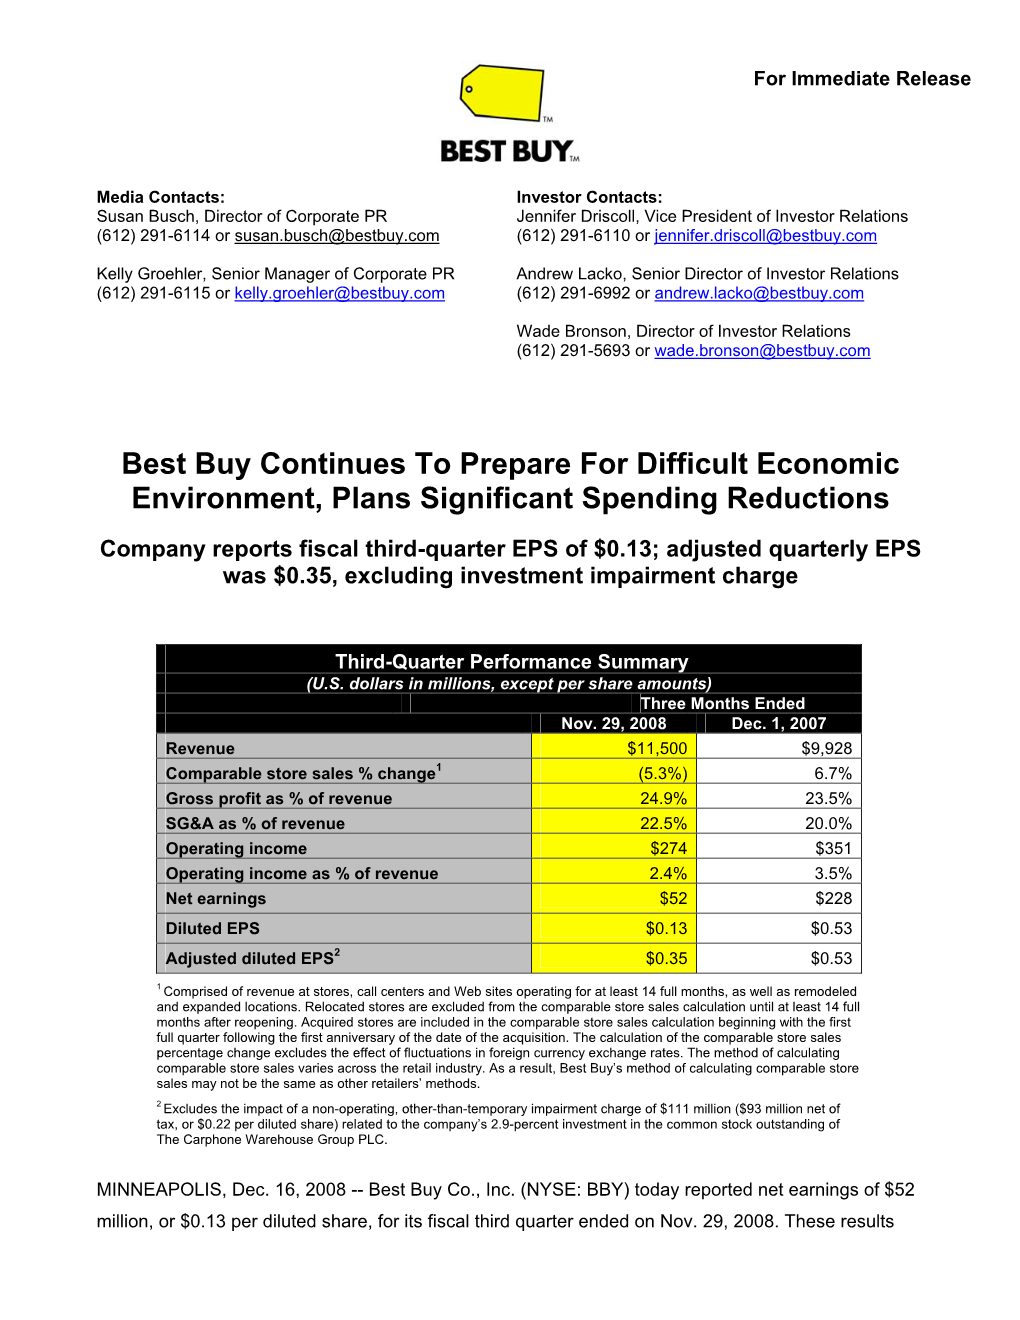 Best Buy Continues to Prepare for Difficult Economic Environment, Plans Significant Spending Reductions